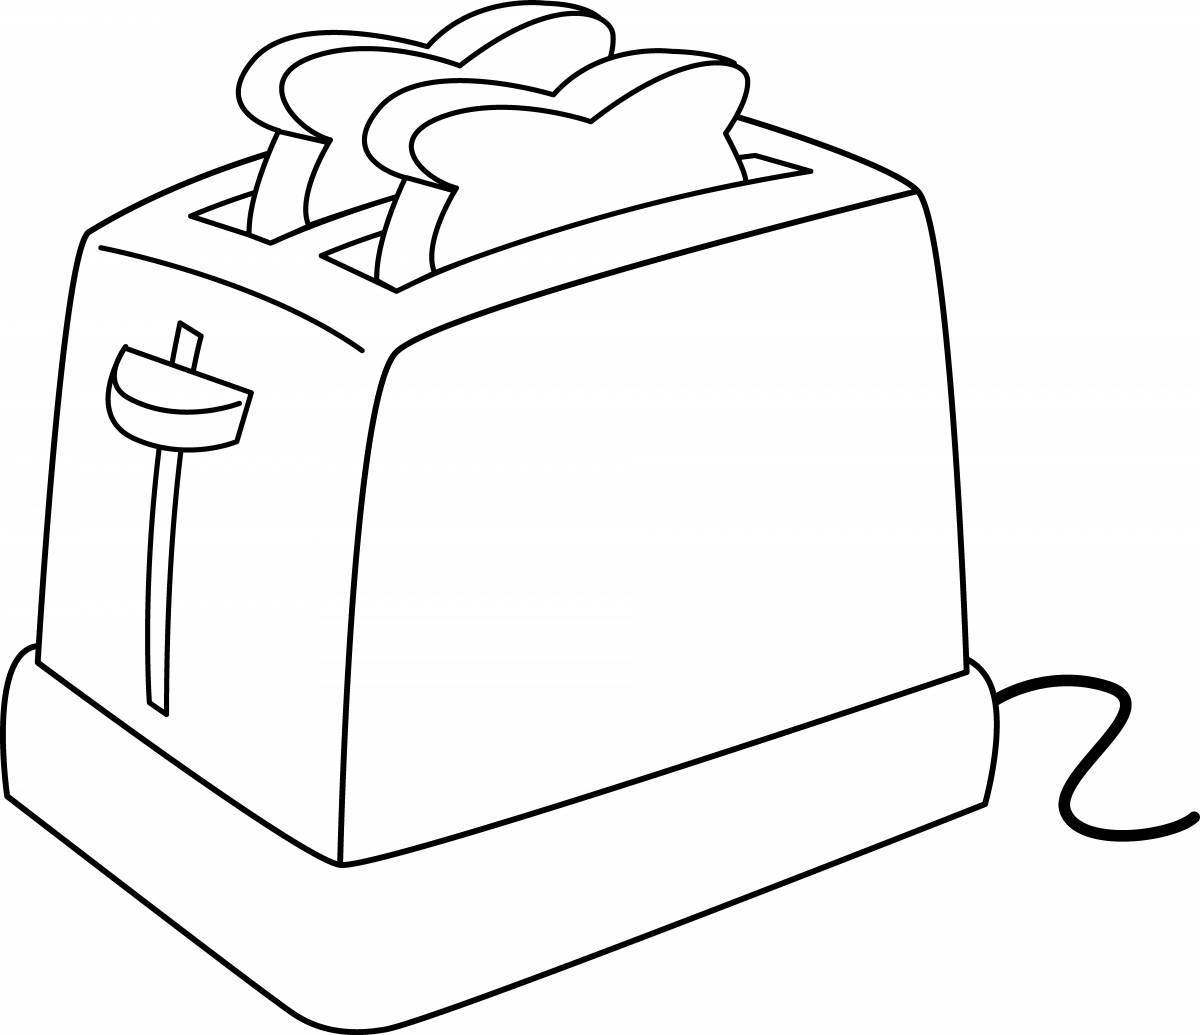 Coloring toast coloring page